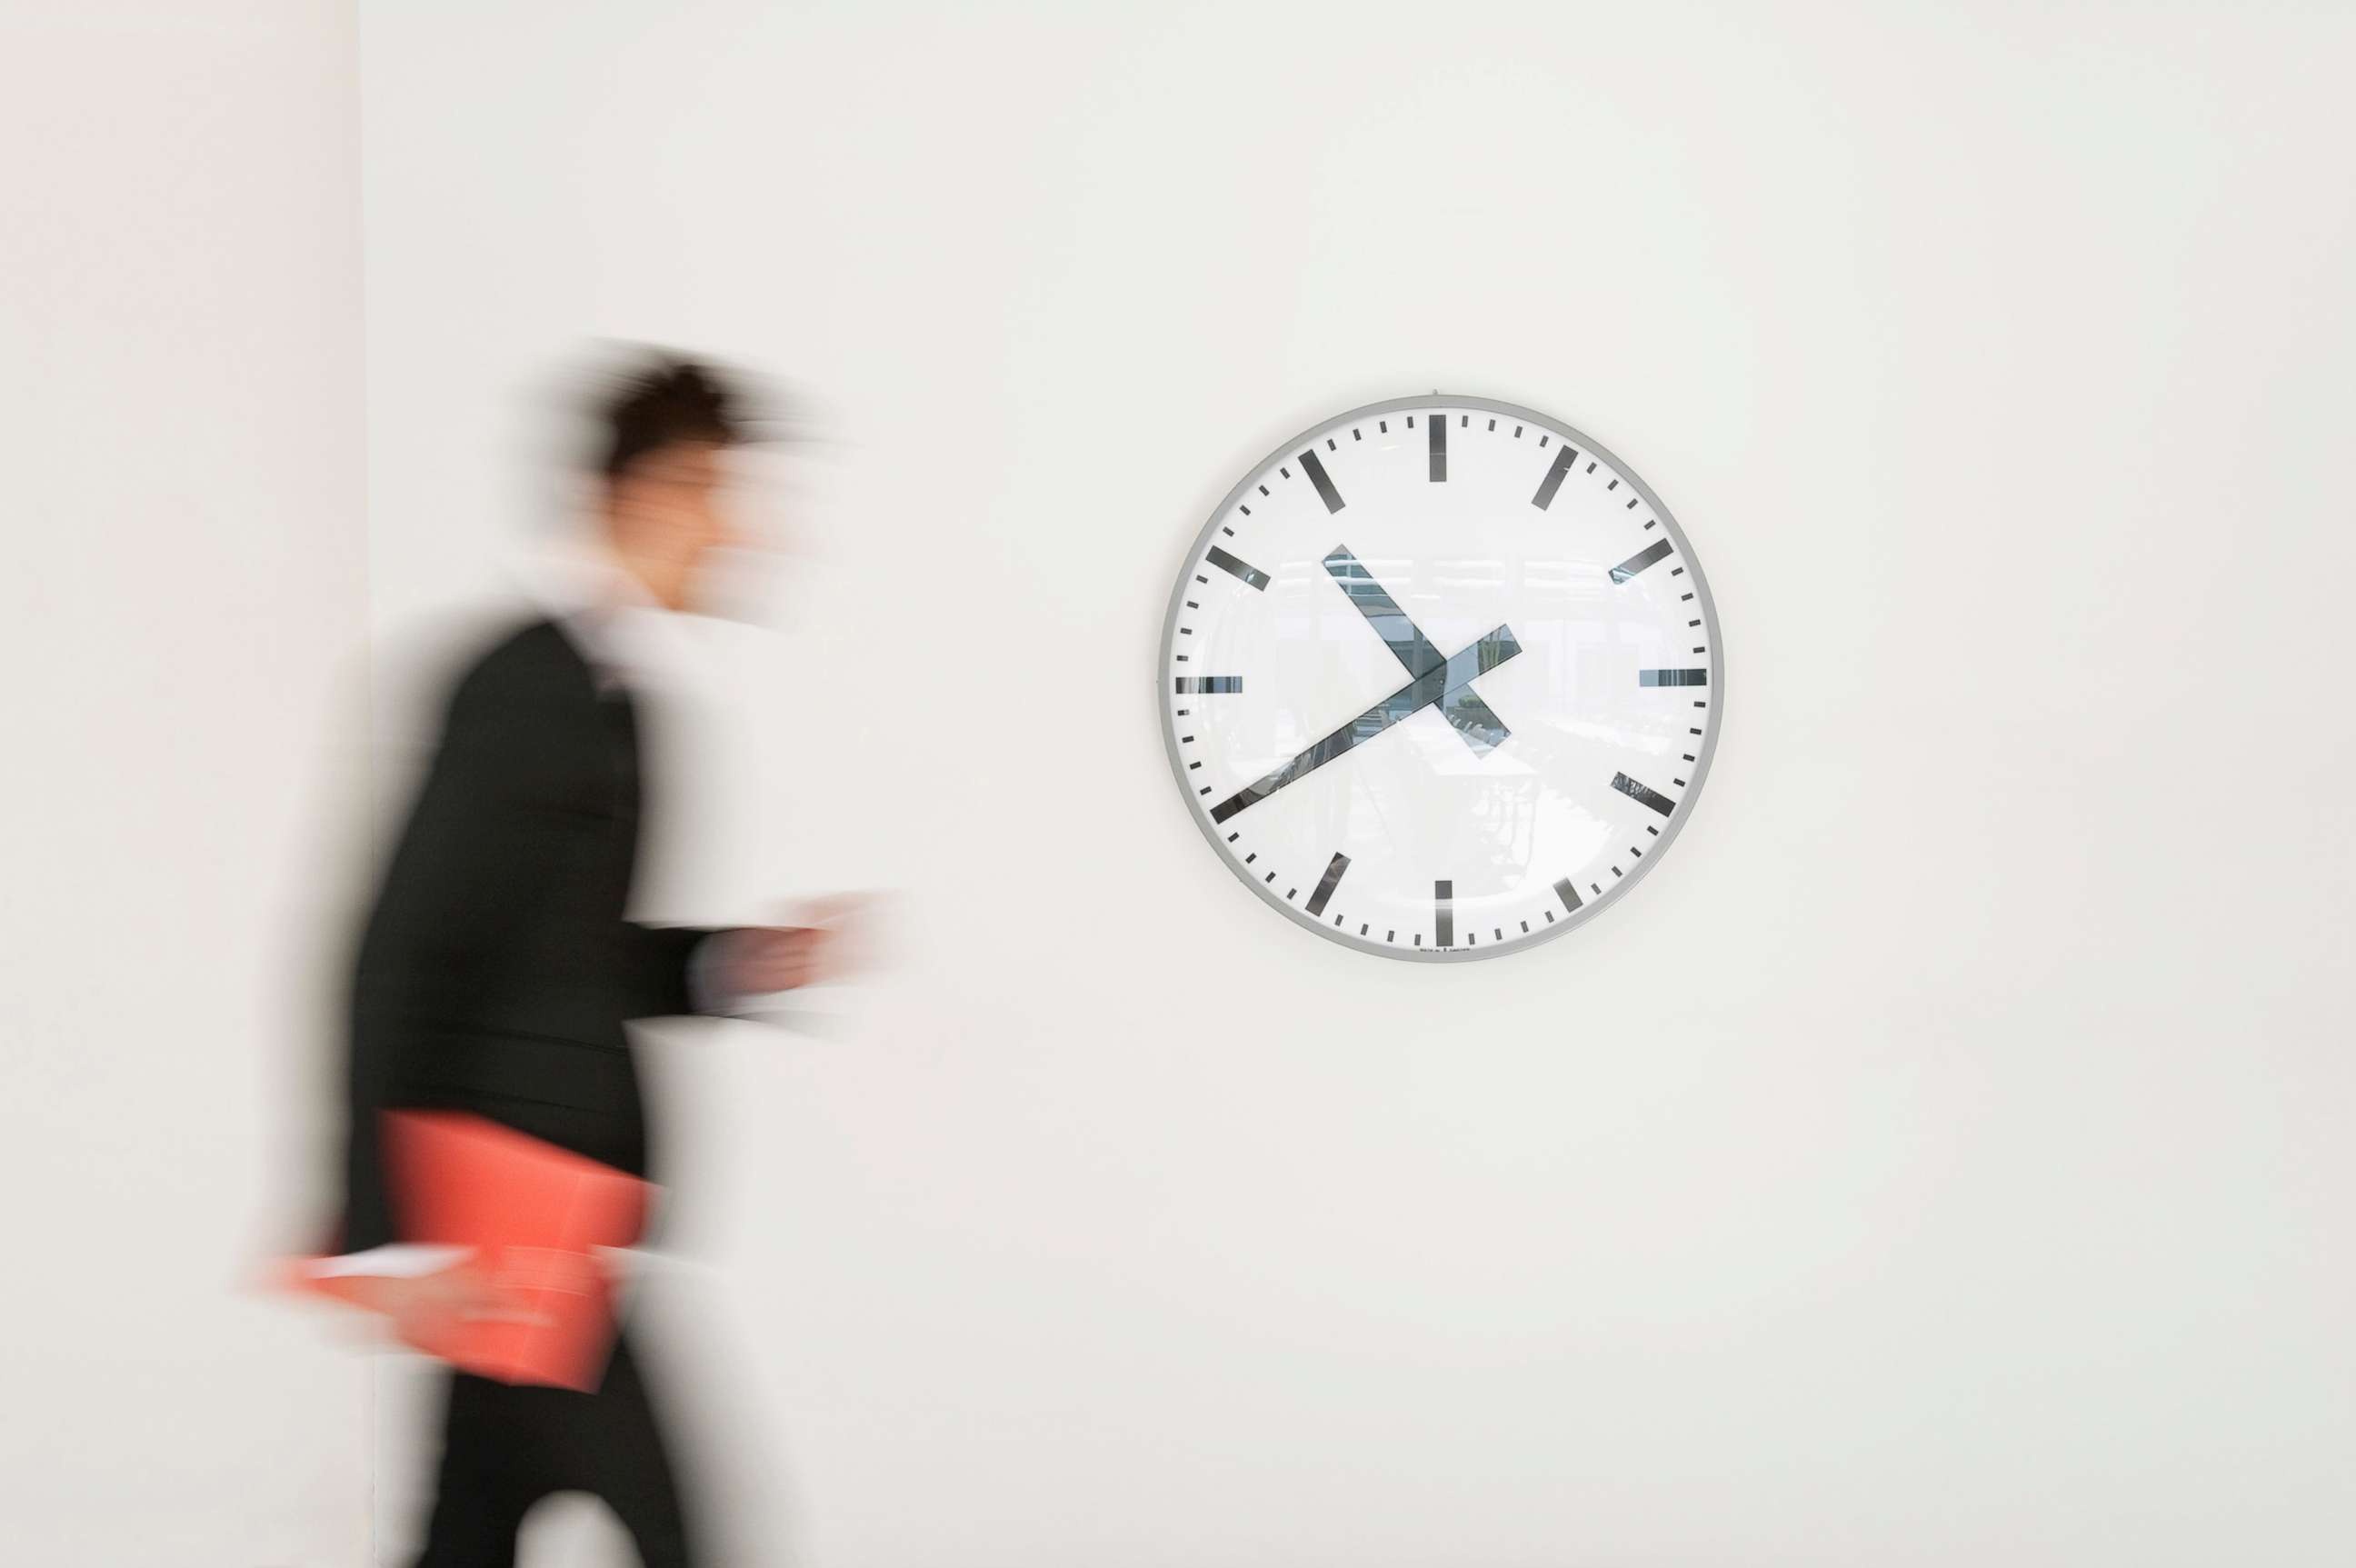 PHOTO: Daylight saving time concept is pictured in a stock image.